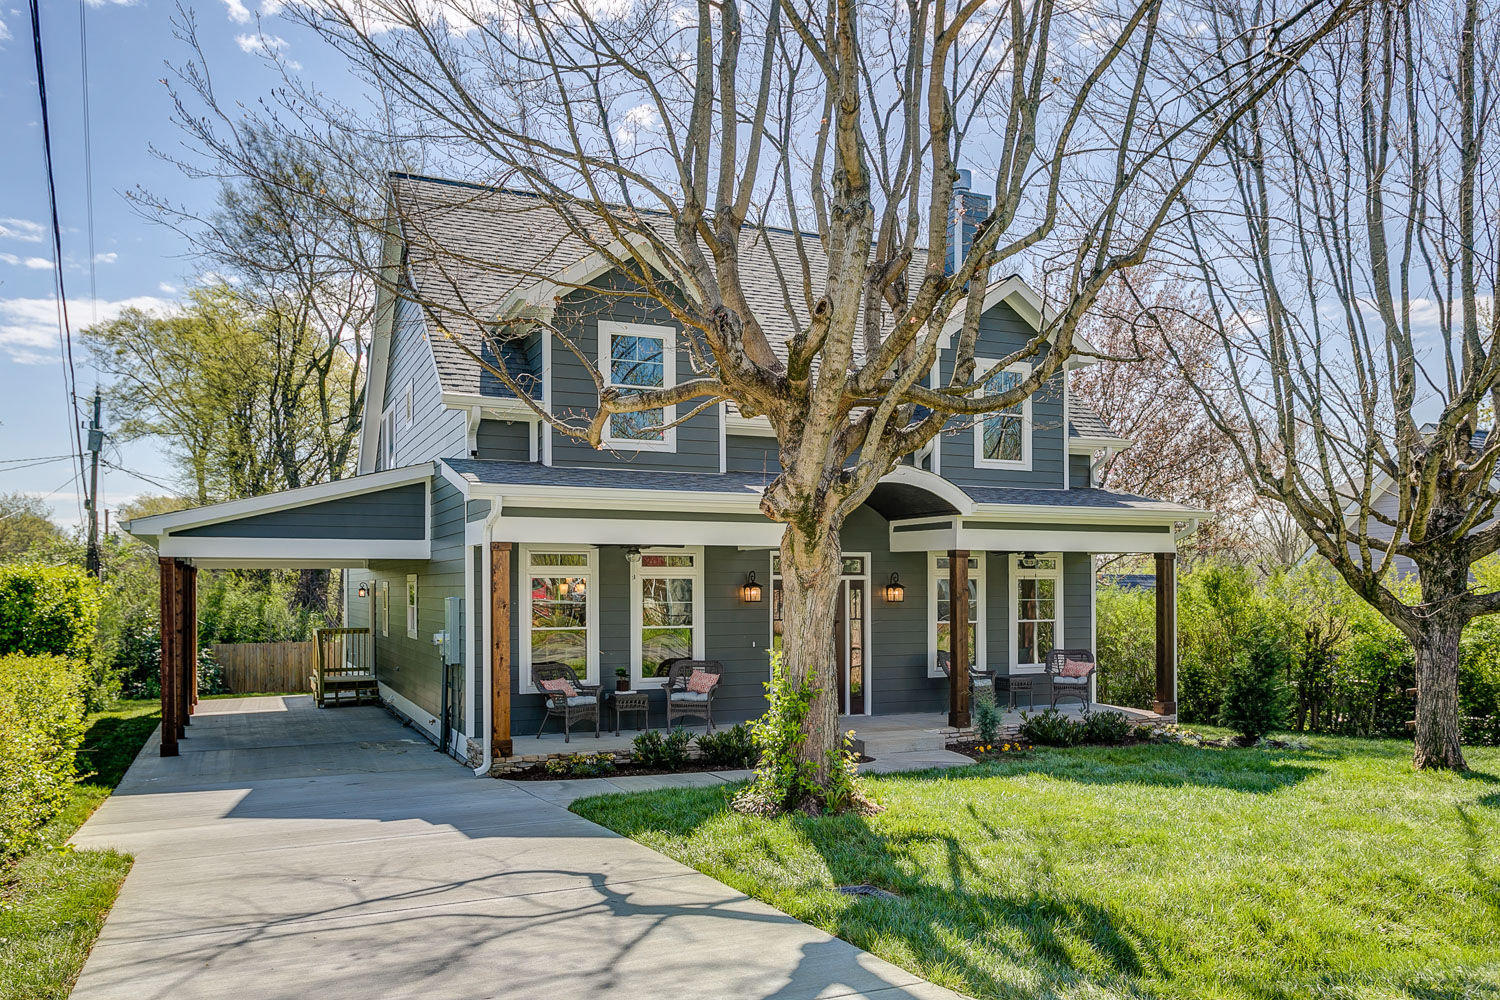 Craftsman Inspired Build in downtown Franklin